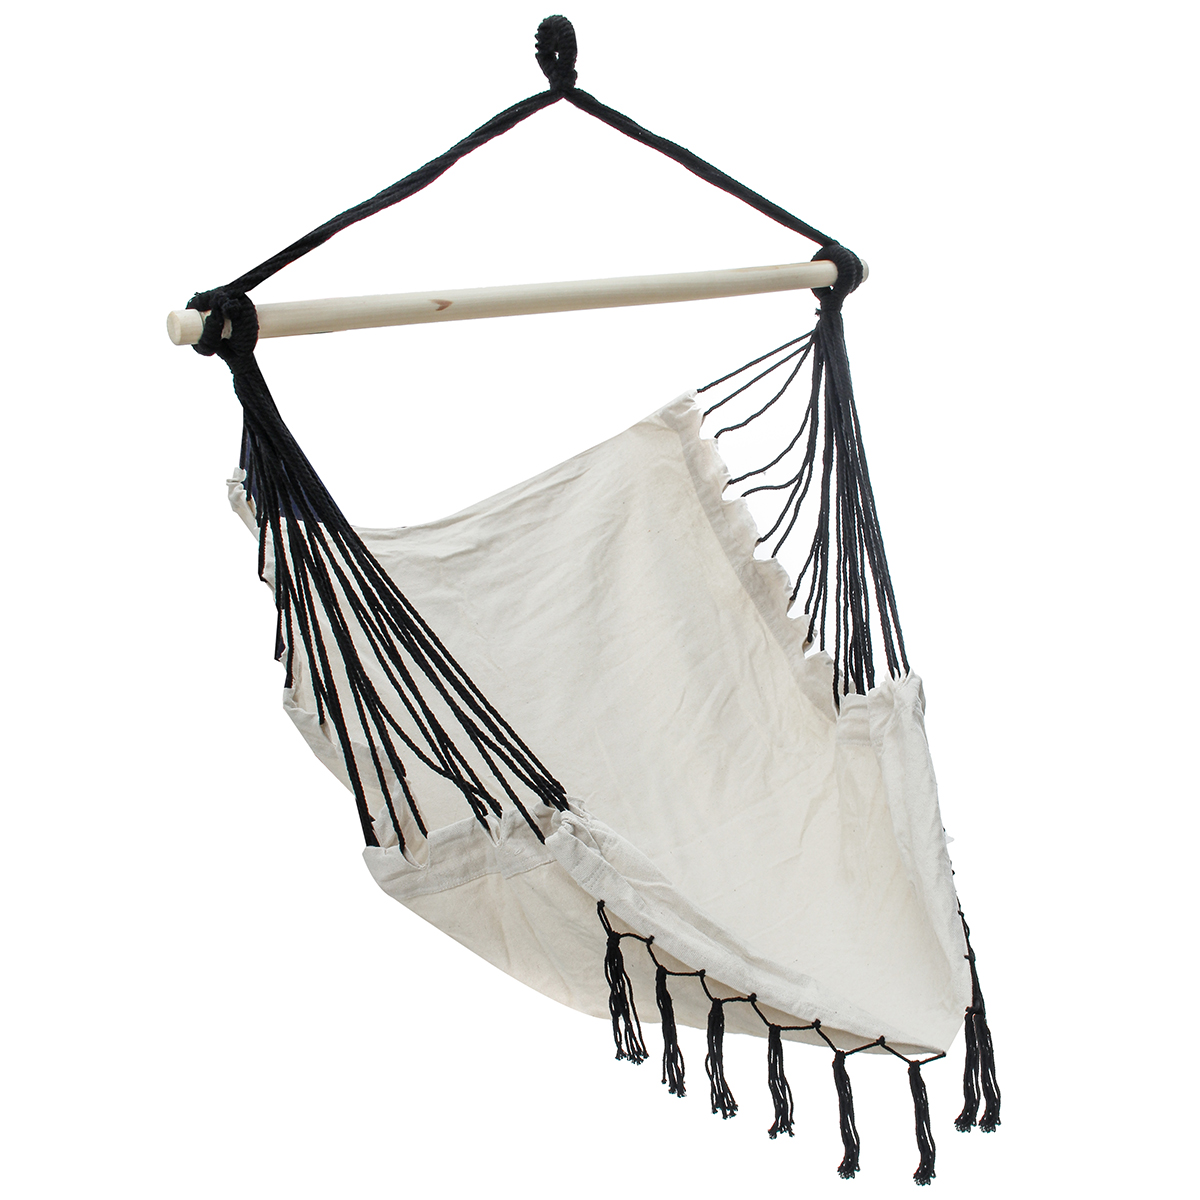 394x512inch-Hammock-Chair-Double-People-Hanging-Swinging-Garden-Swinging-Chair-Camping-Travel-Beach-1742289-3